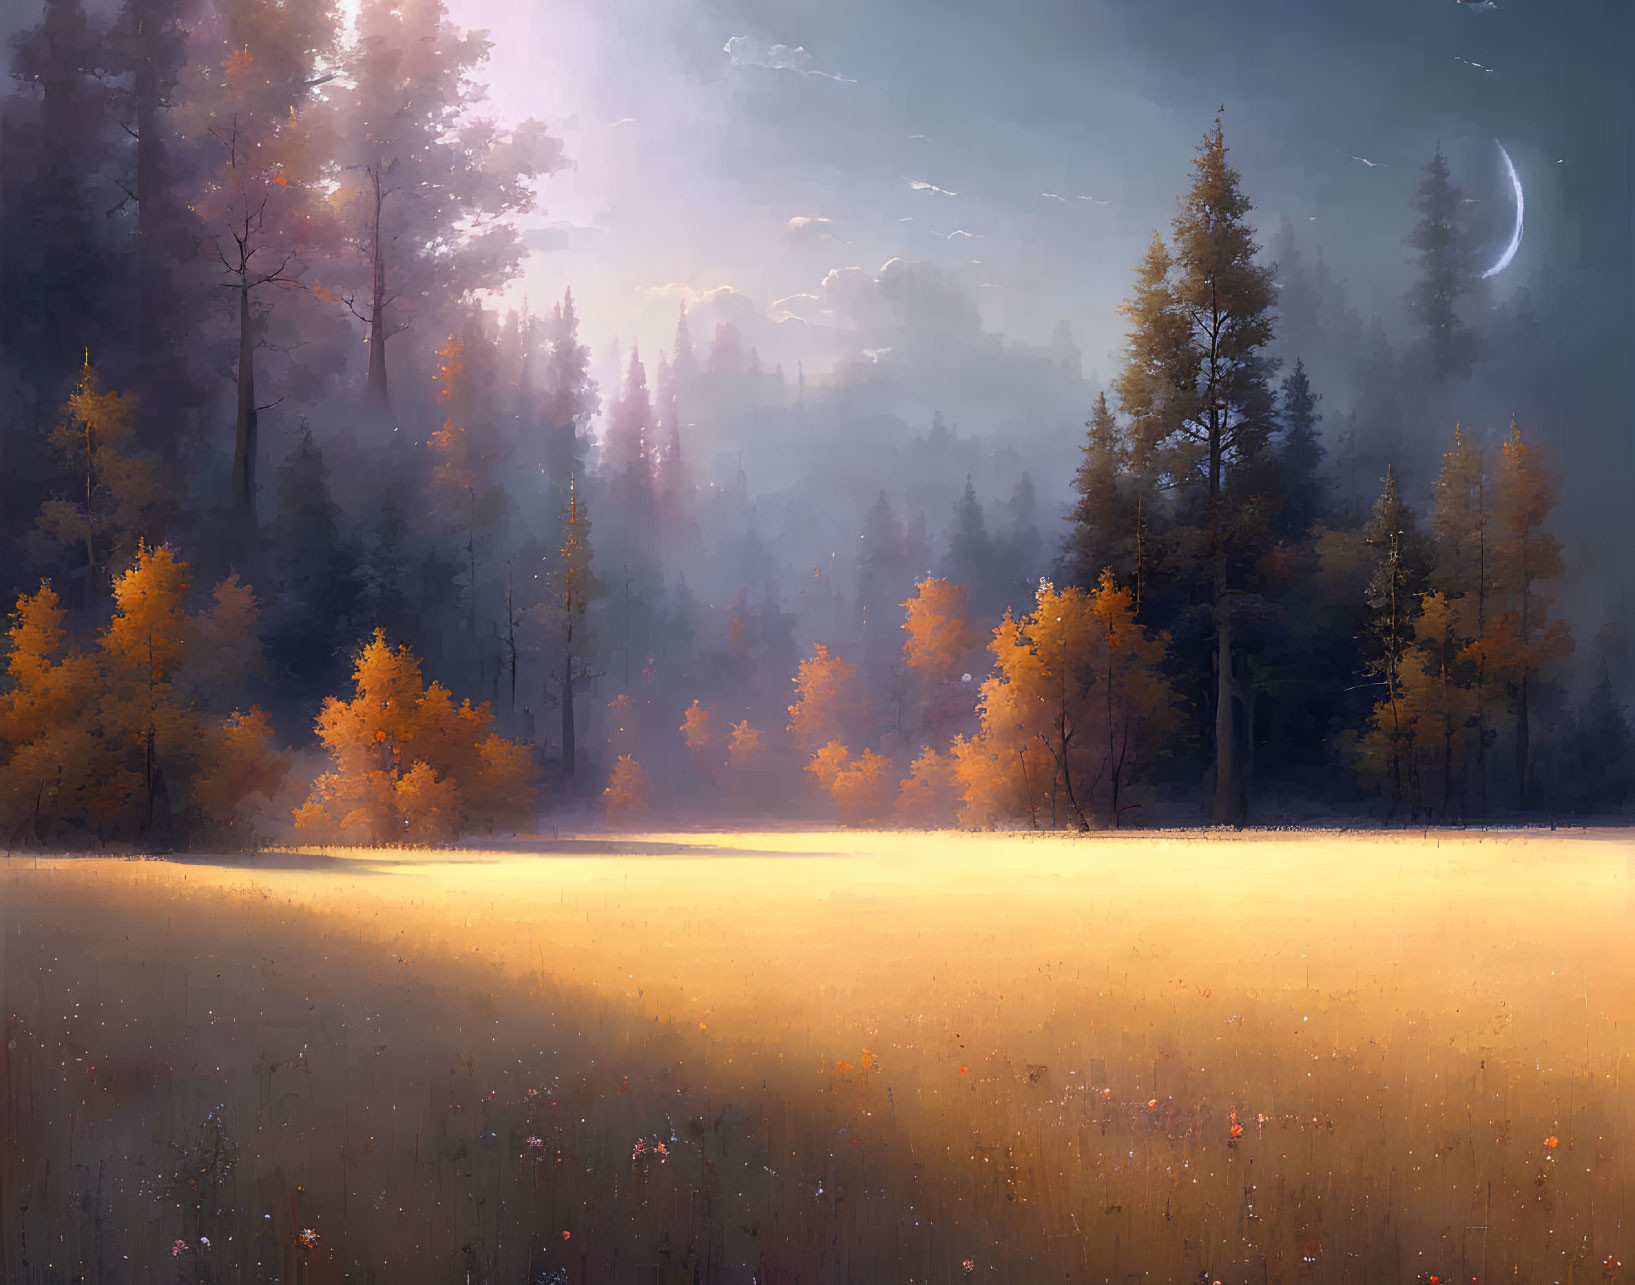 Serene forest clearing at dusk with golden trees, soft grass glow, and crescent moon